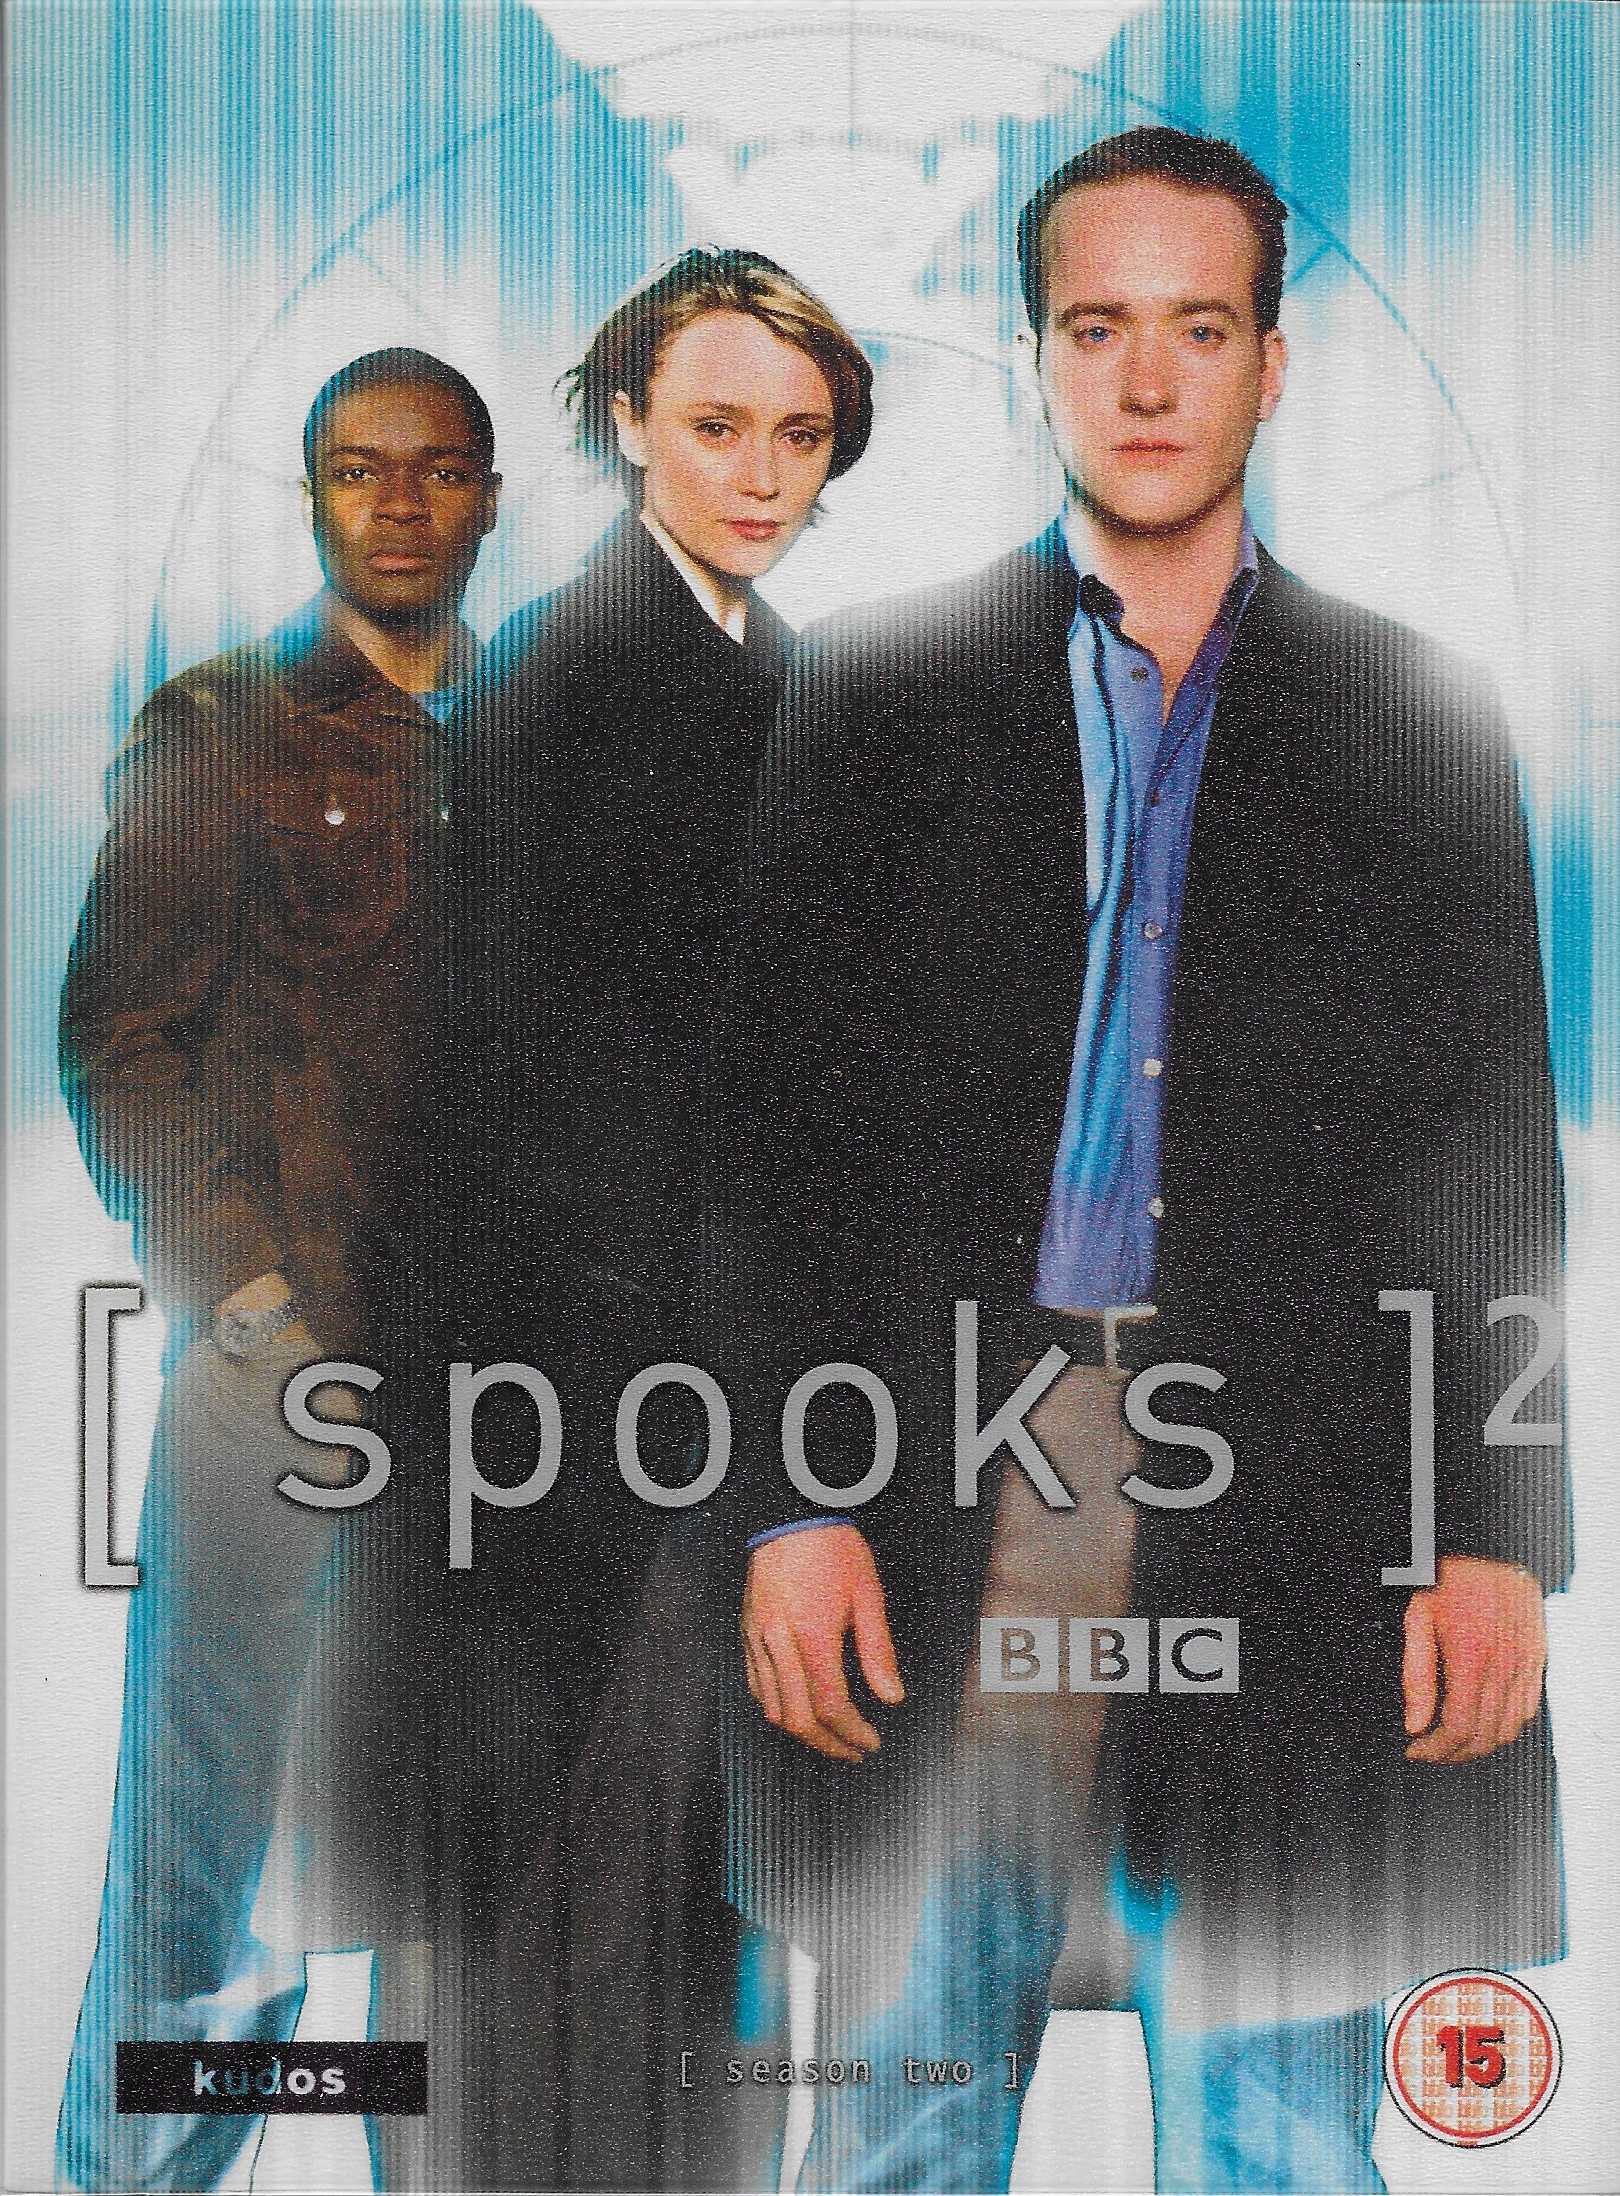 Picture of [ spooks ]2 by artist David Wolstencroft / Howard Brenton / Matthew Graham / Simon Mirren / Steve Bailie / Ben Richards from the BBC dvds - Records and Tapes library